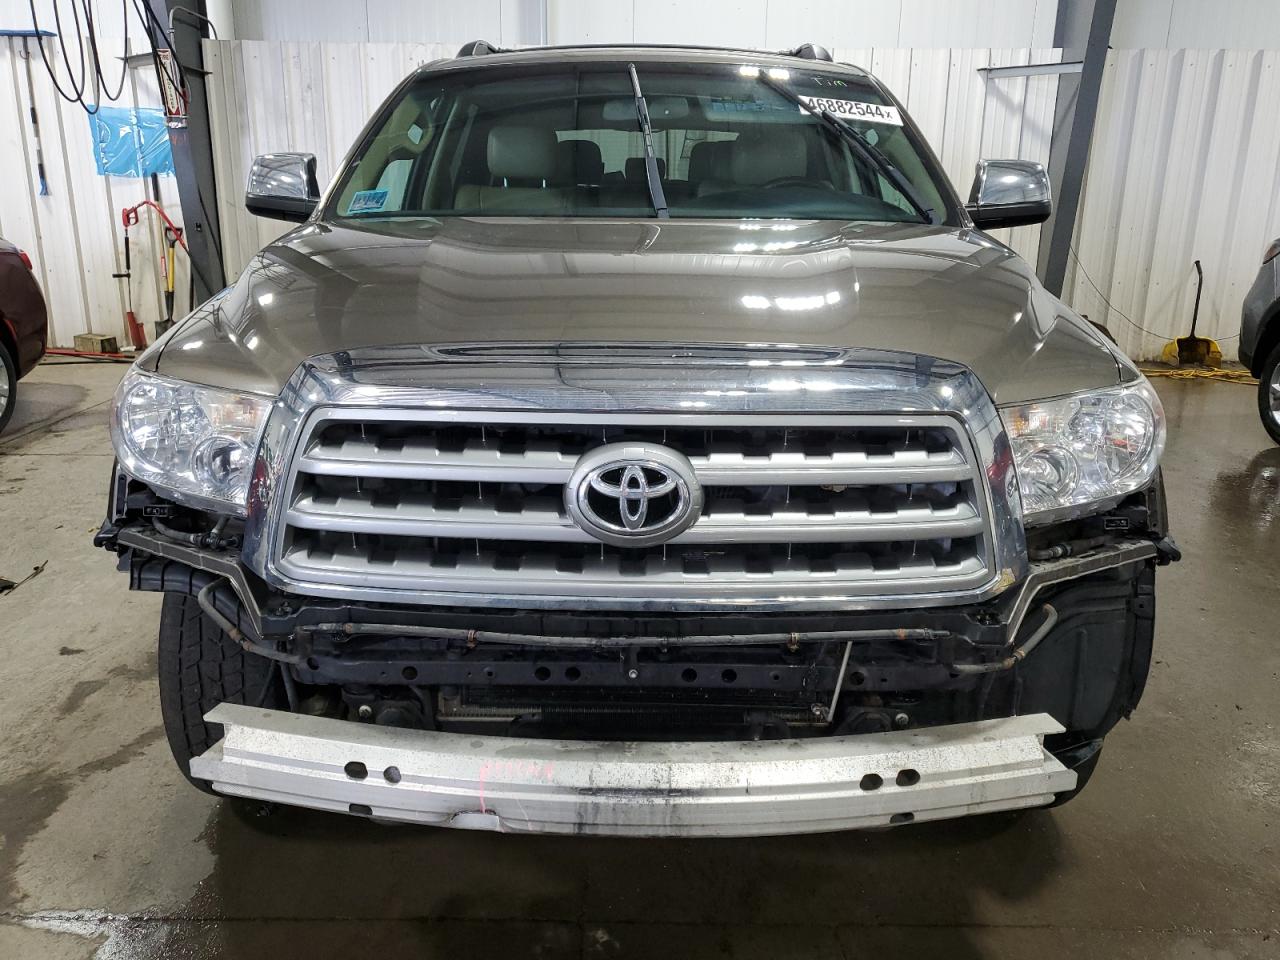 5TDJW5G10DS079106  - TOYOTA SEQUOIA  2013 IMG - 4